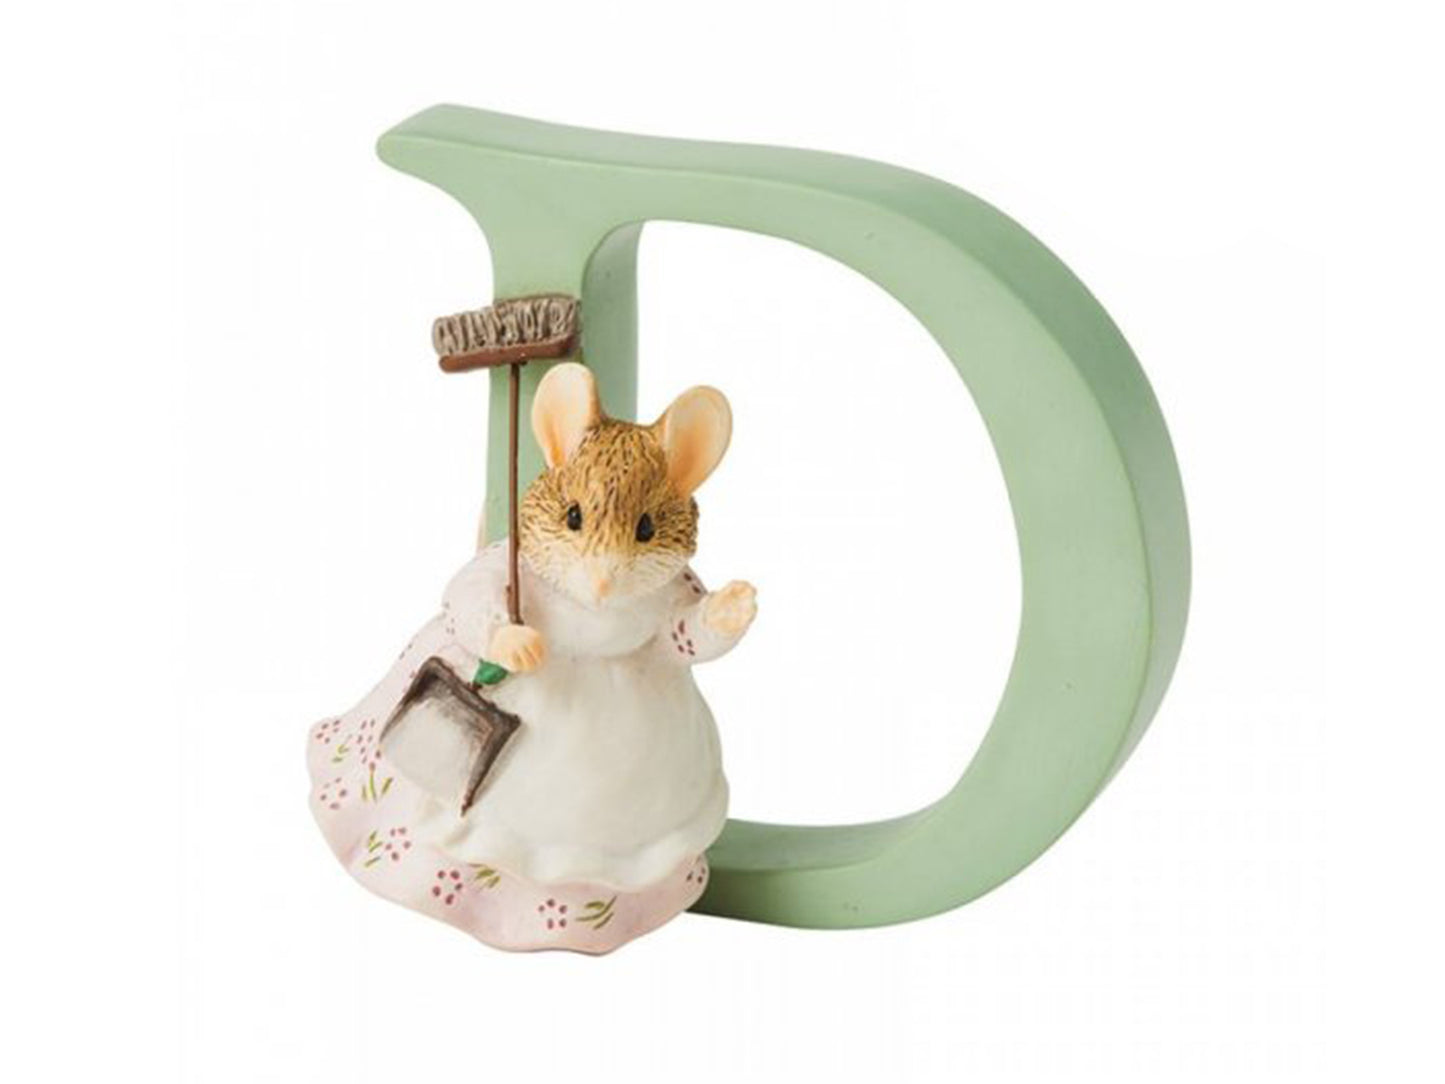 A light green letter D figure with a small mouse statue attached, wearing a lilac floral dress with a white apron, carrying a brown broom